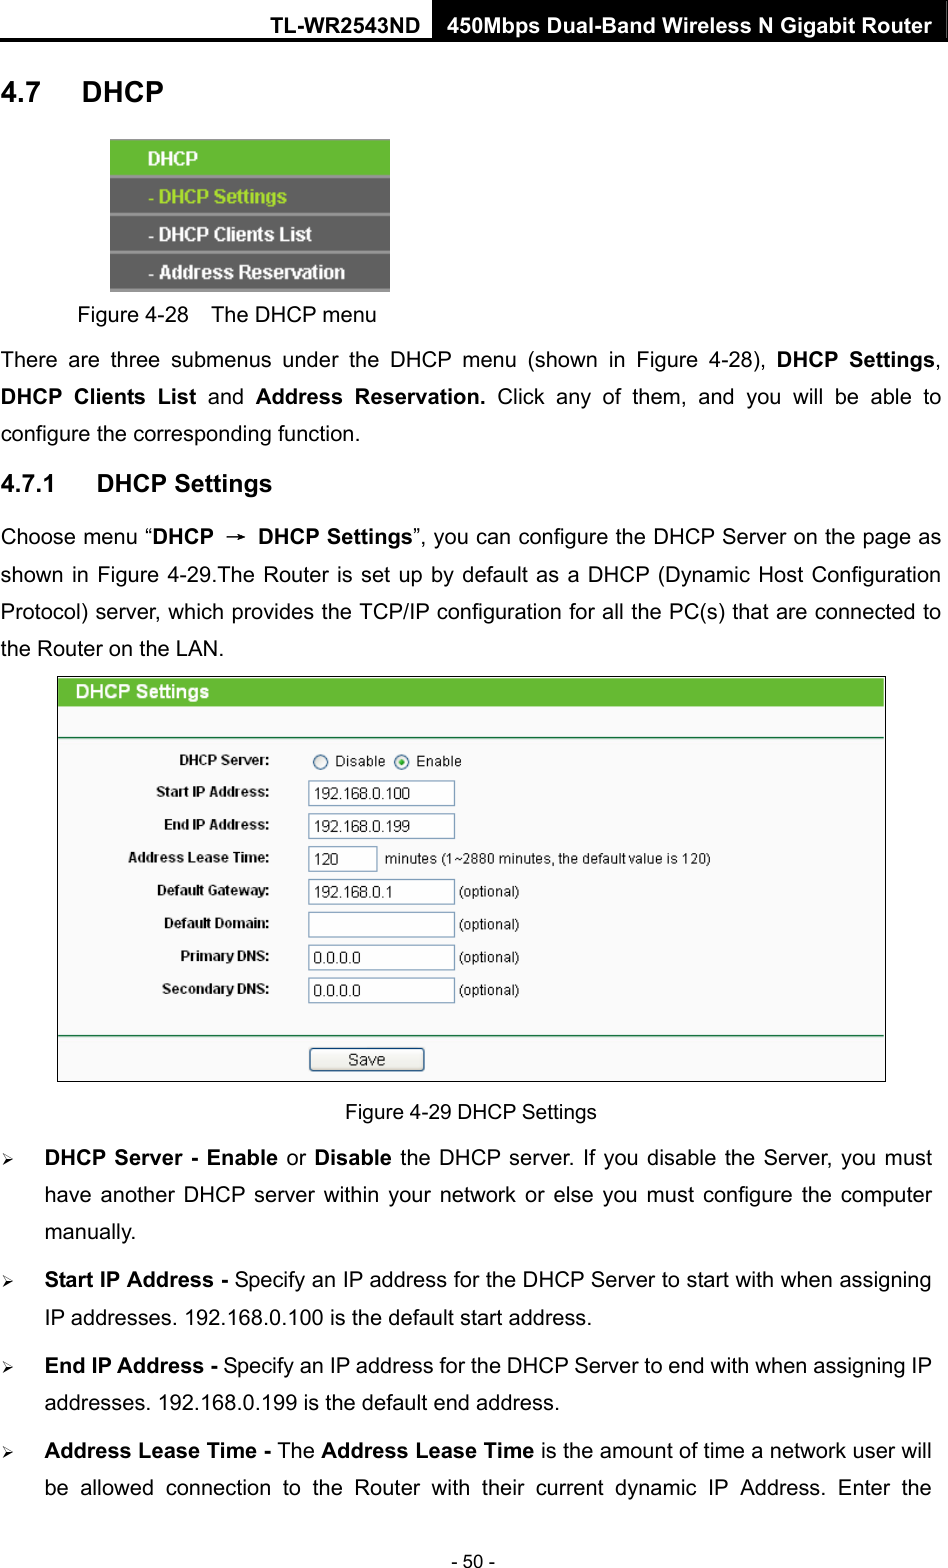 TL-WR2543ND 450Mbps Dual-Band Wireless N Gigabit Router - 50 - 4.7  DHCP  Figure 4-28    The DHCP menu There are three submenus under the DHCP menu (shown in Figure 4-28), DHCP Settings, DHCP Clients List and  Address Reservation. Click any of them, and you will be able to configure the corresponding function. 4.7.1  DHCP Settings Choose menu “DHCP  → DHCP Settings”, you can configure the DHCP Server on the page as shown in Figure 4-29.The Router is set up by default as a DHCP (Dynamic Host Configuration Protocol) server, which provides the TCP/IP configuration for all the PC(s) that are connected to the Router on the LAN.    Figure 4-29 DHCP Settings ¾ DHCP Server - Enable or Disable the DHCP server. If you disable the Server, you must have another DHCP server within your network or else you must configure the computer manually. ¾ Start IP Address - Specify an IP address for the DHCP Server to start with when assigning IP addresses. 192.168.0.100 is the default start address. ¾ End IP Address - Specify an IP address for the DHCP Server to end with when assigning IP addresses. 192.168.0.199 is the default end address. ¾ Address Lease Time - The Address Lease Time is the amount of time a network user will be allowed connection to the Router with their current dynamic IP Address. Enter the 